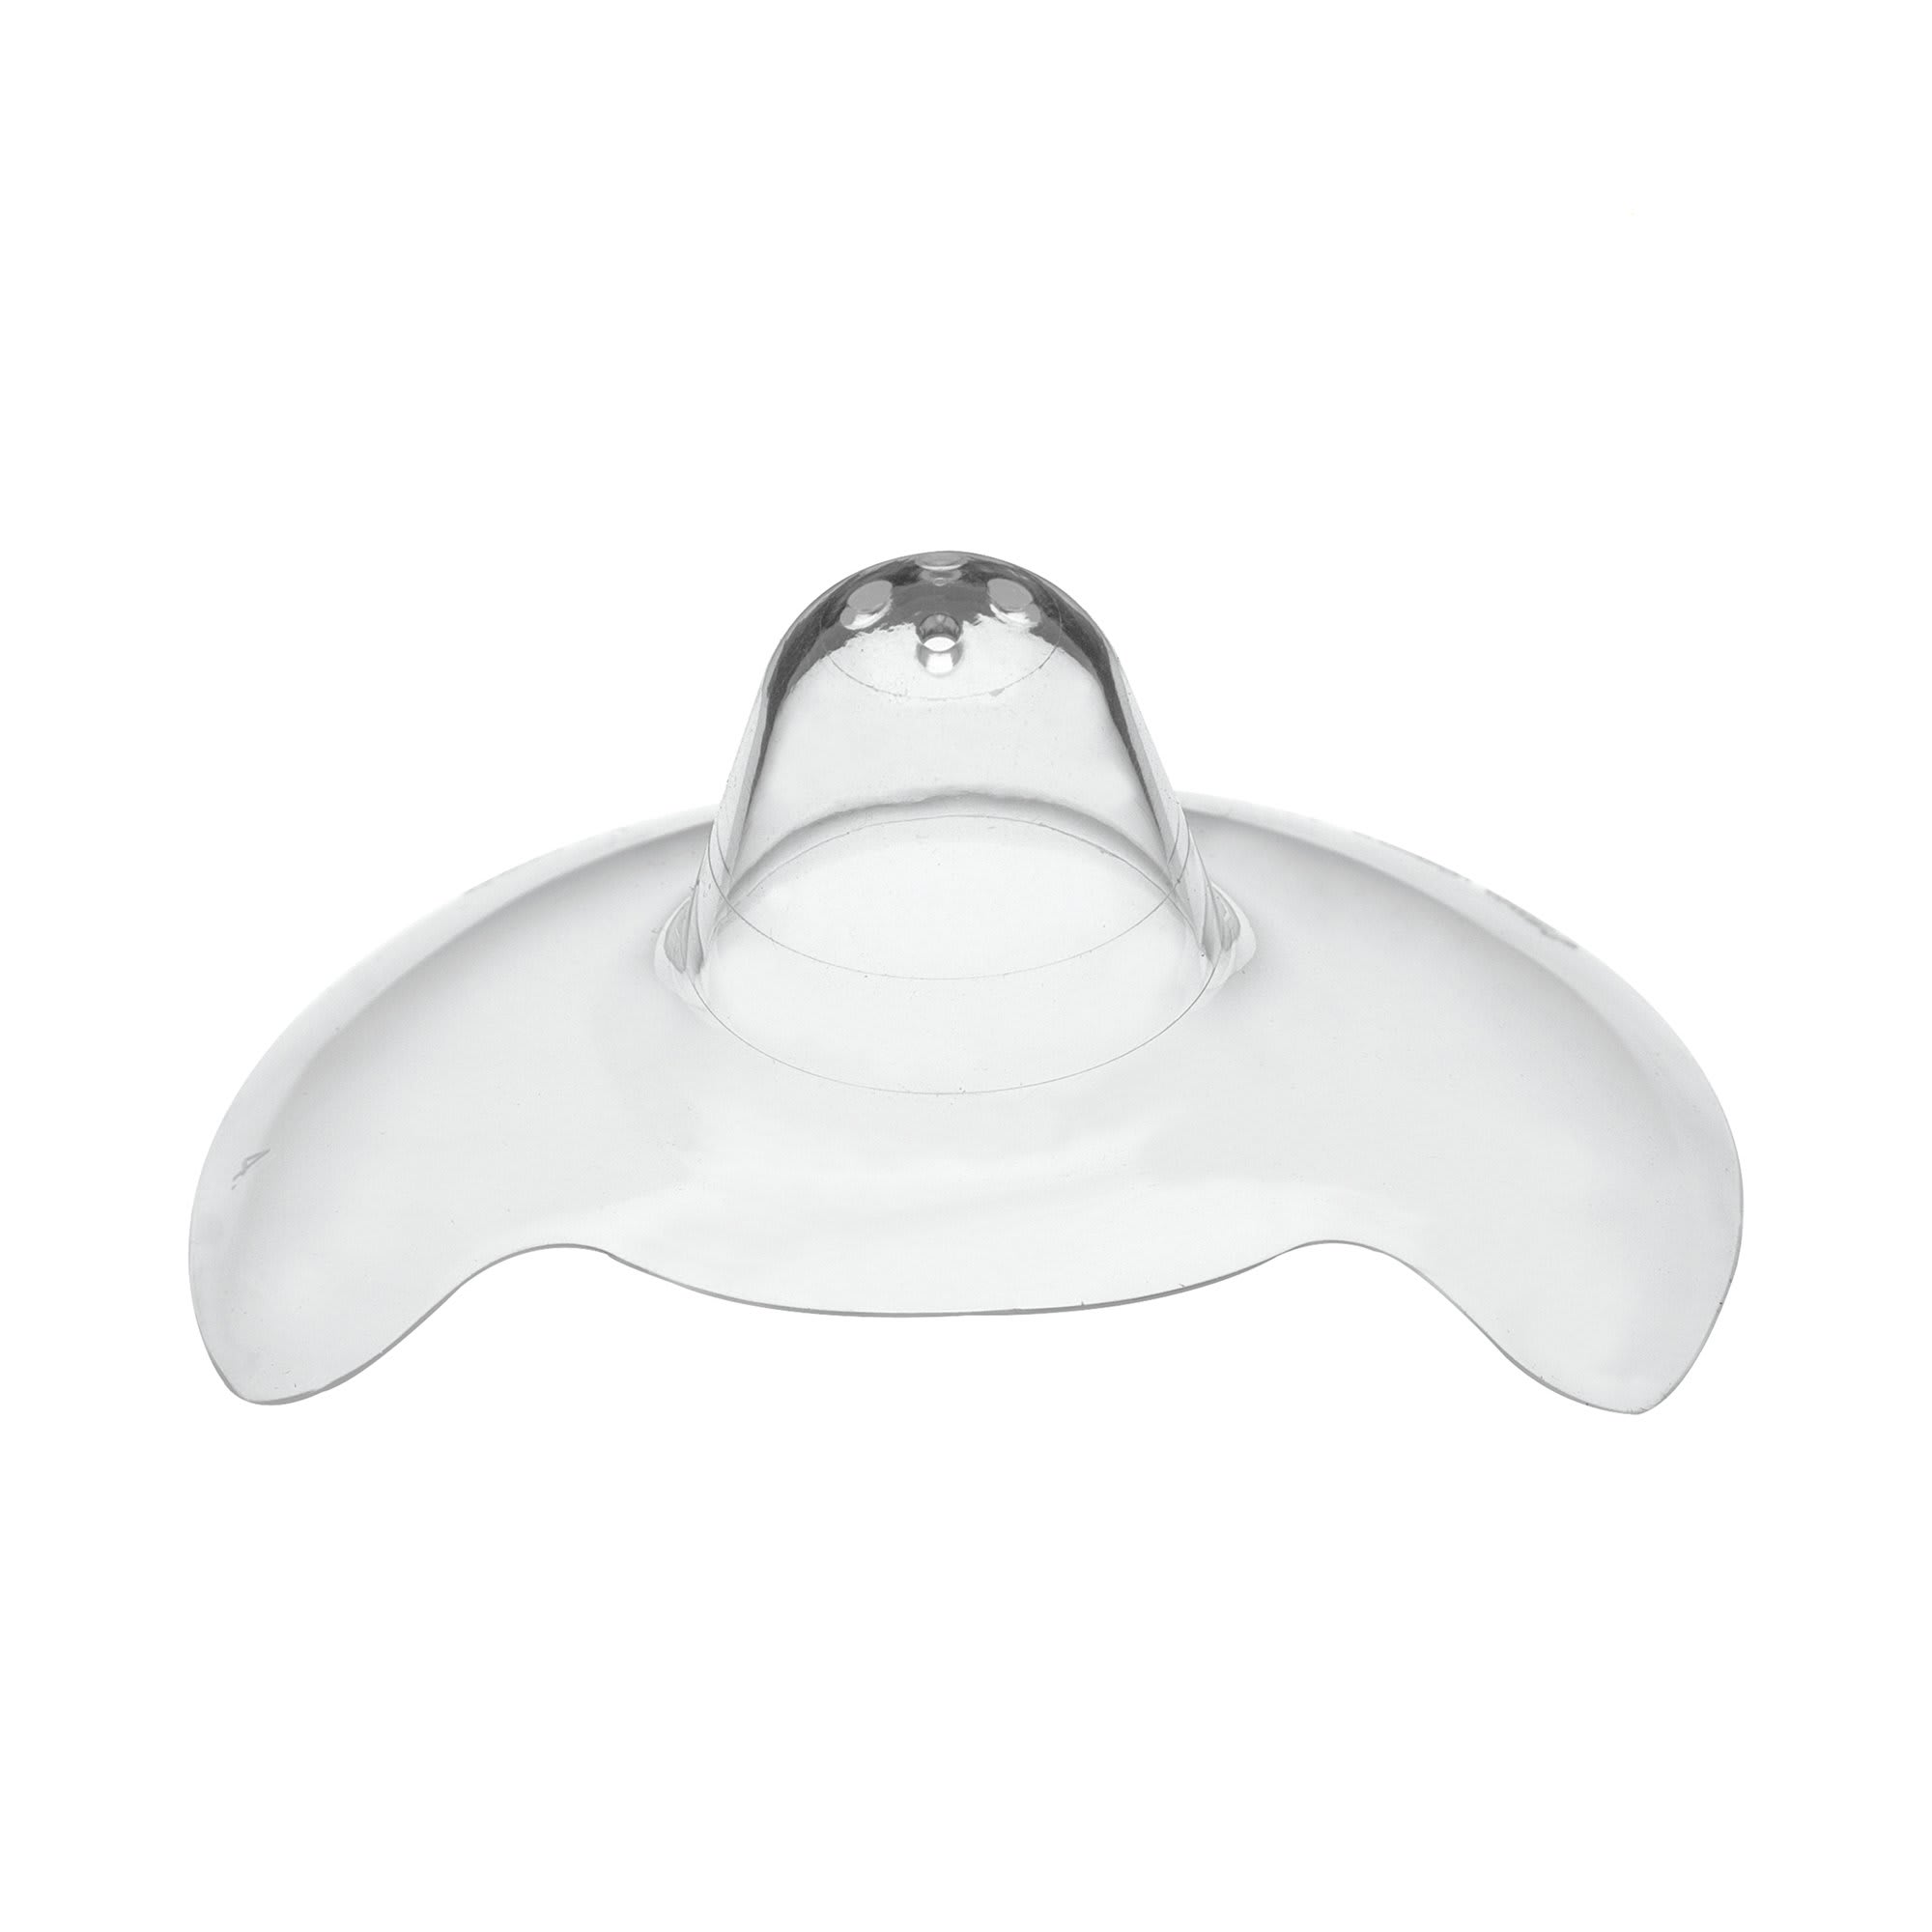 Lansinoh Contact Nipple Shields, 2 Nipple Shields (20mm) and Case